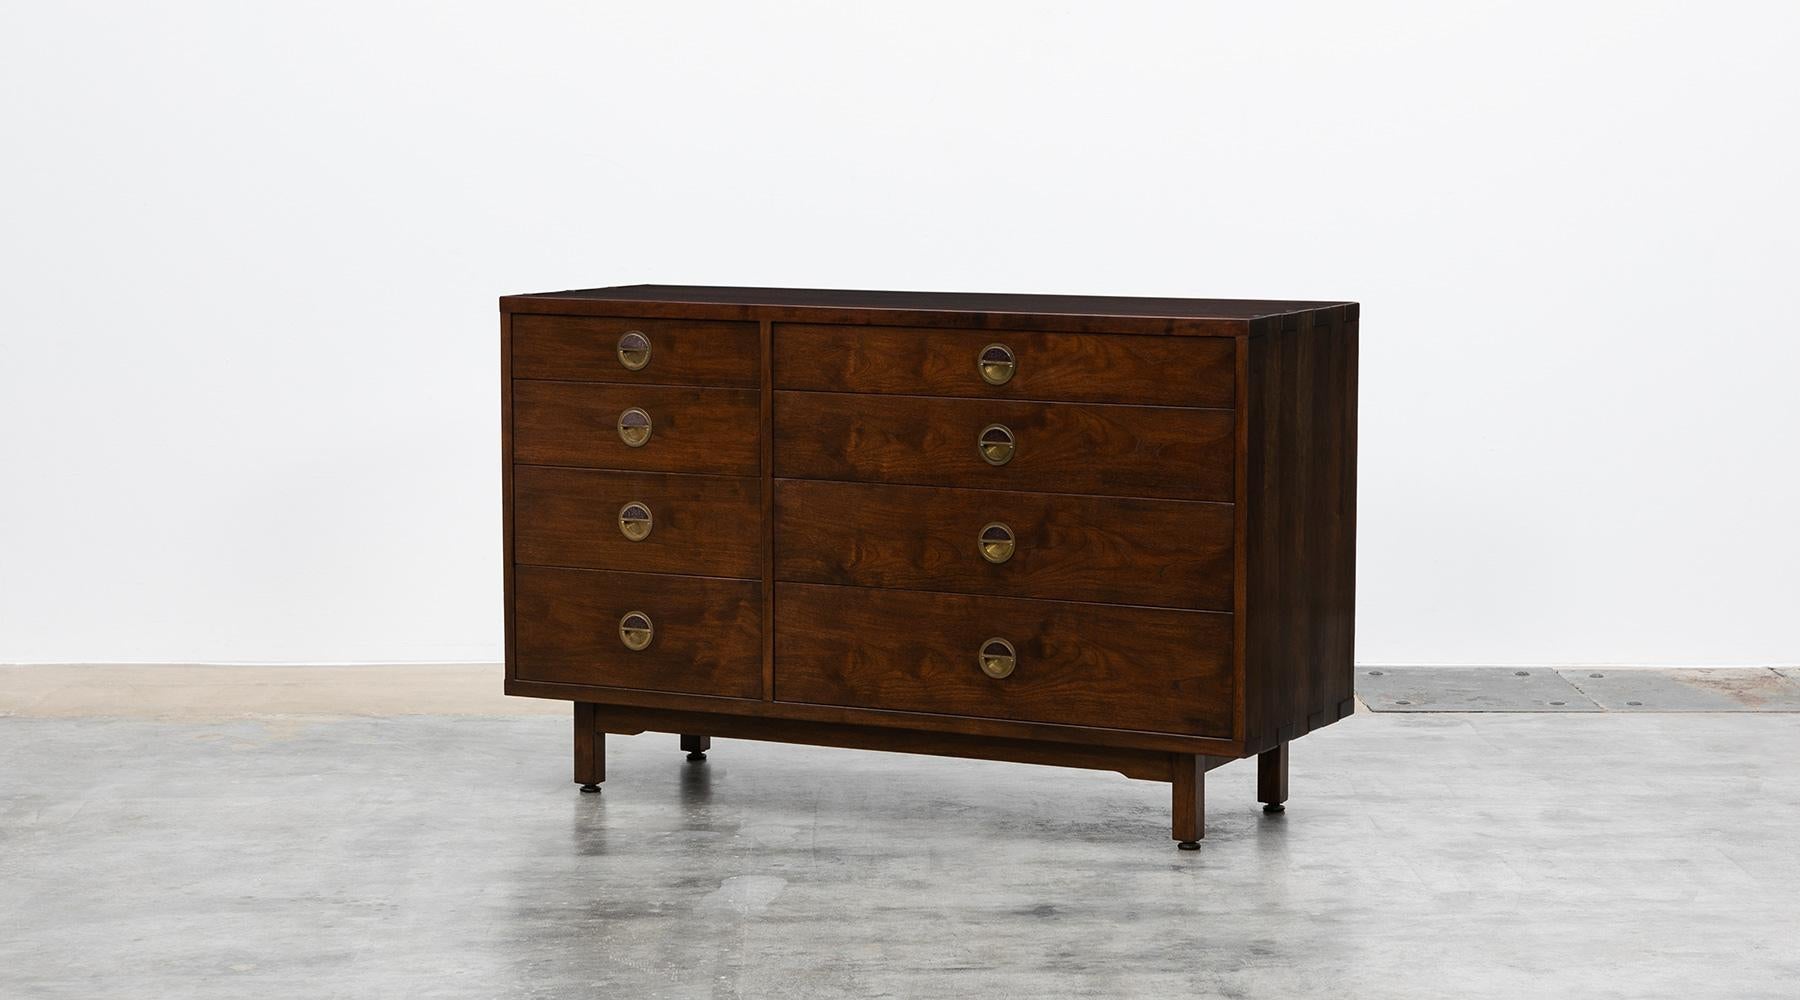 Sideboard in walnut, brass and rosewood details by Edward Wormley, USA, 1960.

Fantastically simple and beautiful Edward Wormley cabinet. The marvelous walnut wood is matching graceful with brass handles and rosewood details. Manufactured by